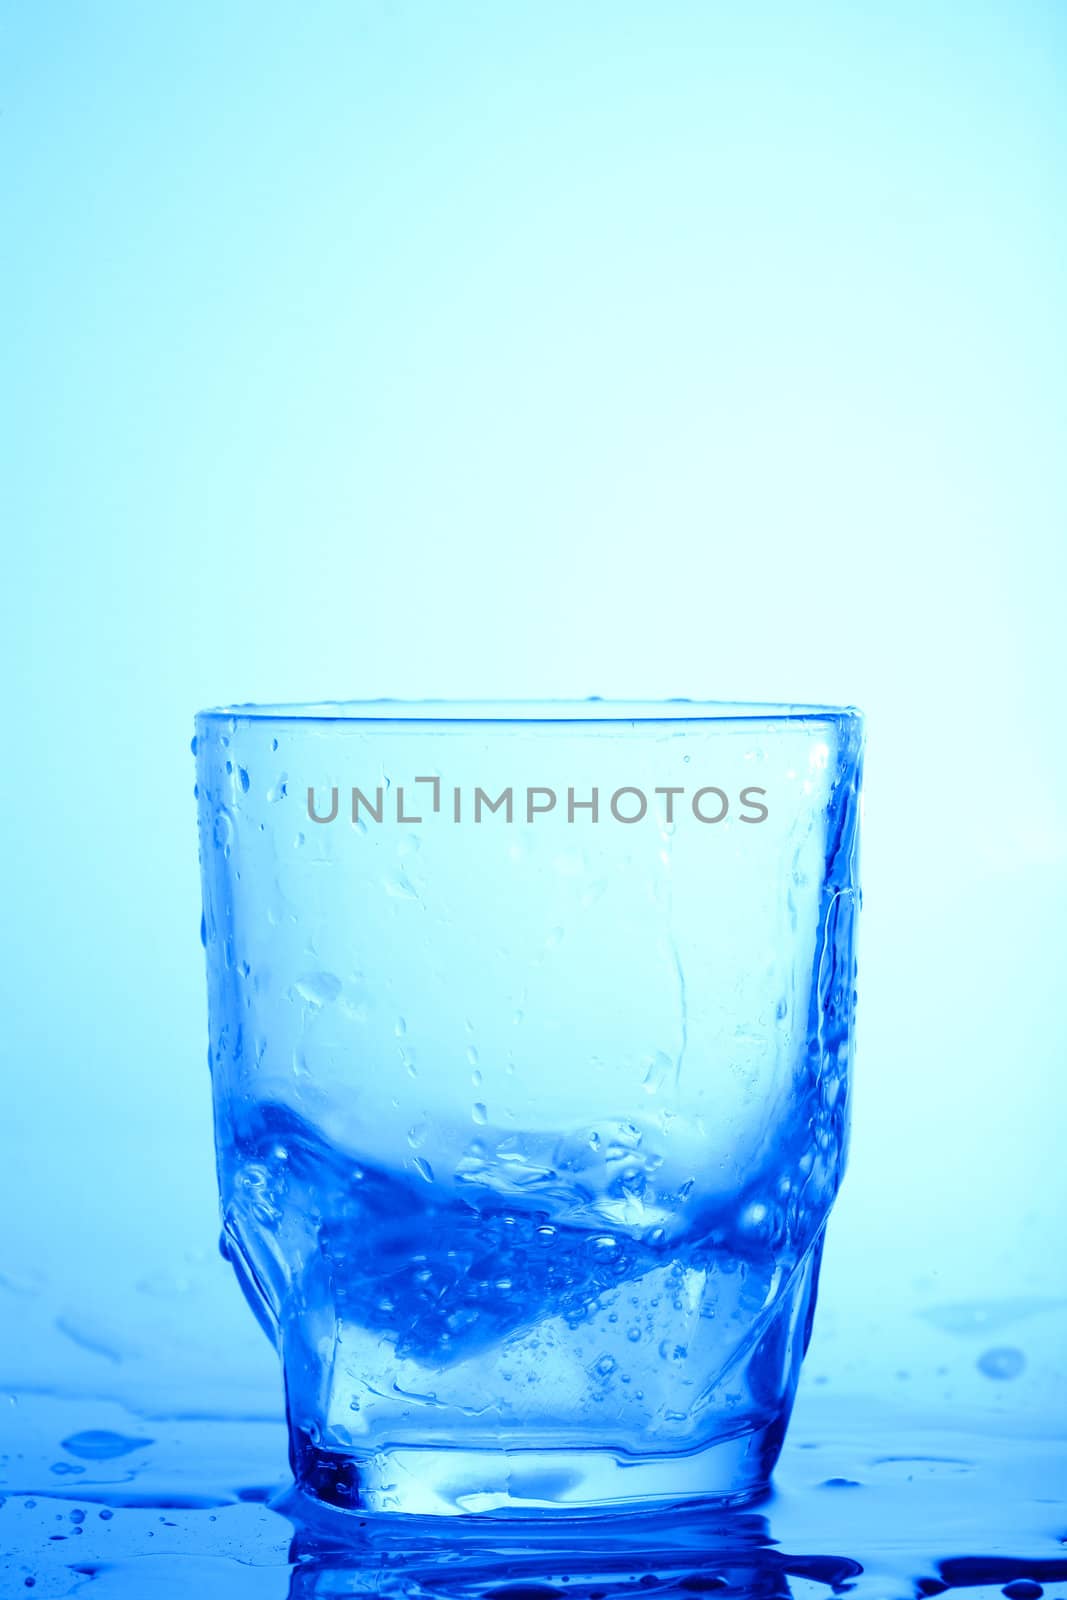 An image of a glass on blue background